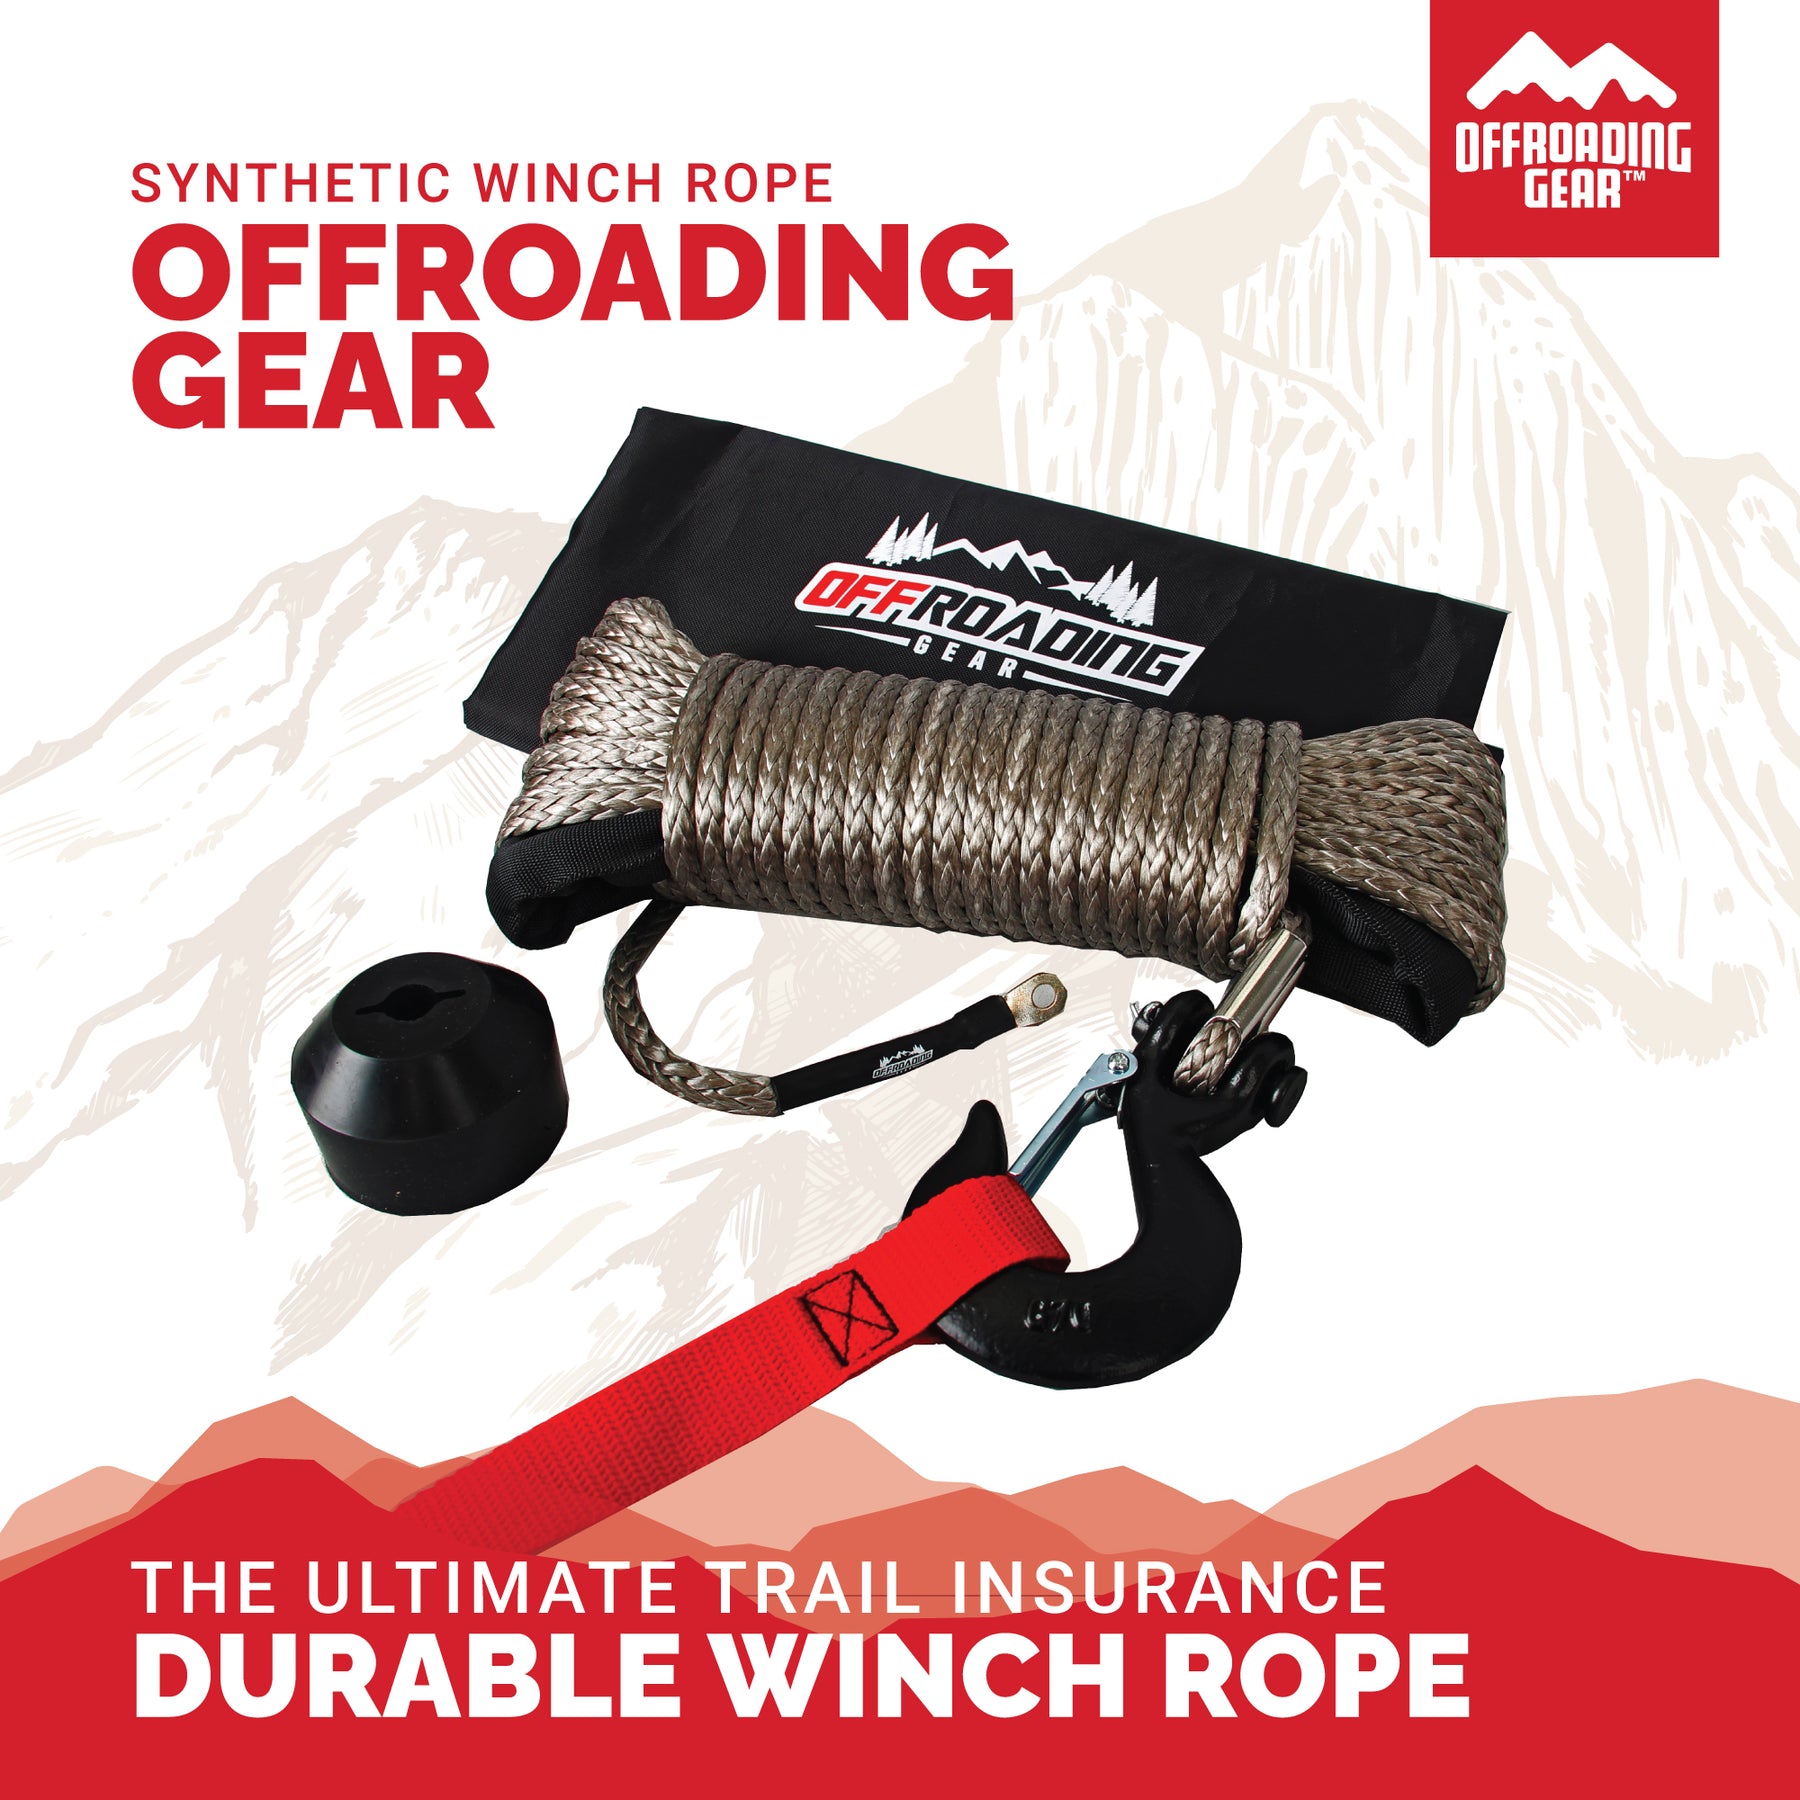 Winch Hook 8T + Rubber Stopper Set For Synthetic Winch Rope Off